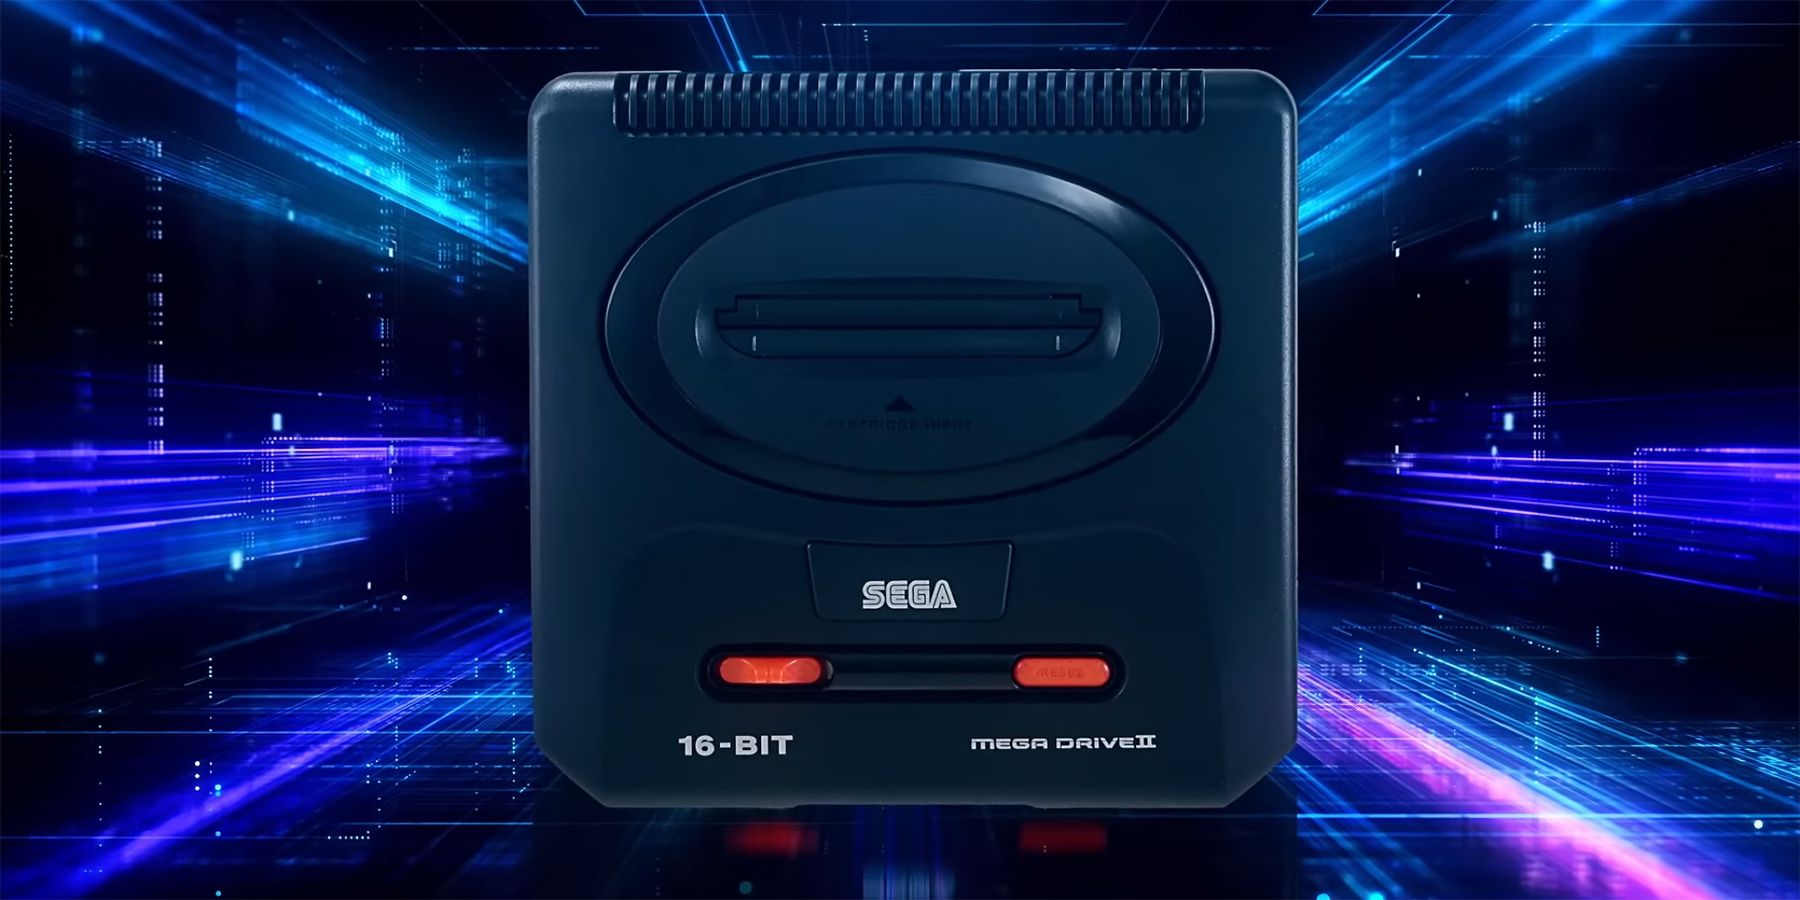 Sega Is Asking Fans Which Mini Console They’d Like
Next